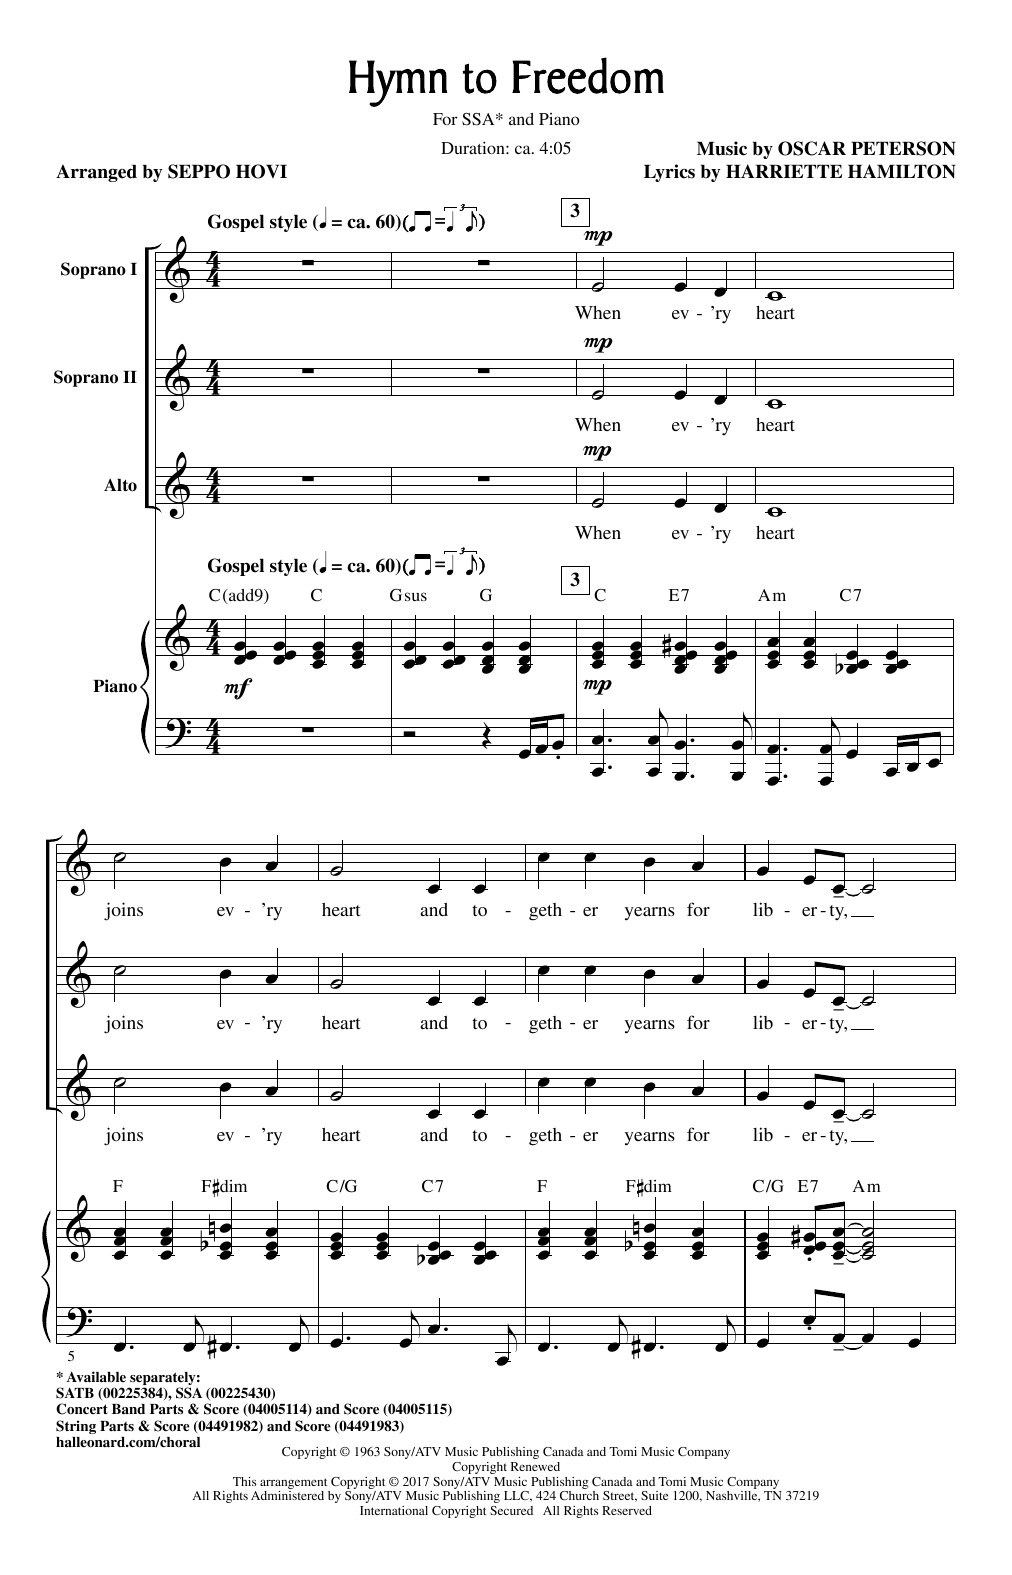 Download Oscar Peterson Hymn To Freedom (arr. Seppo Hovi) Sheet Music